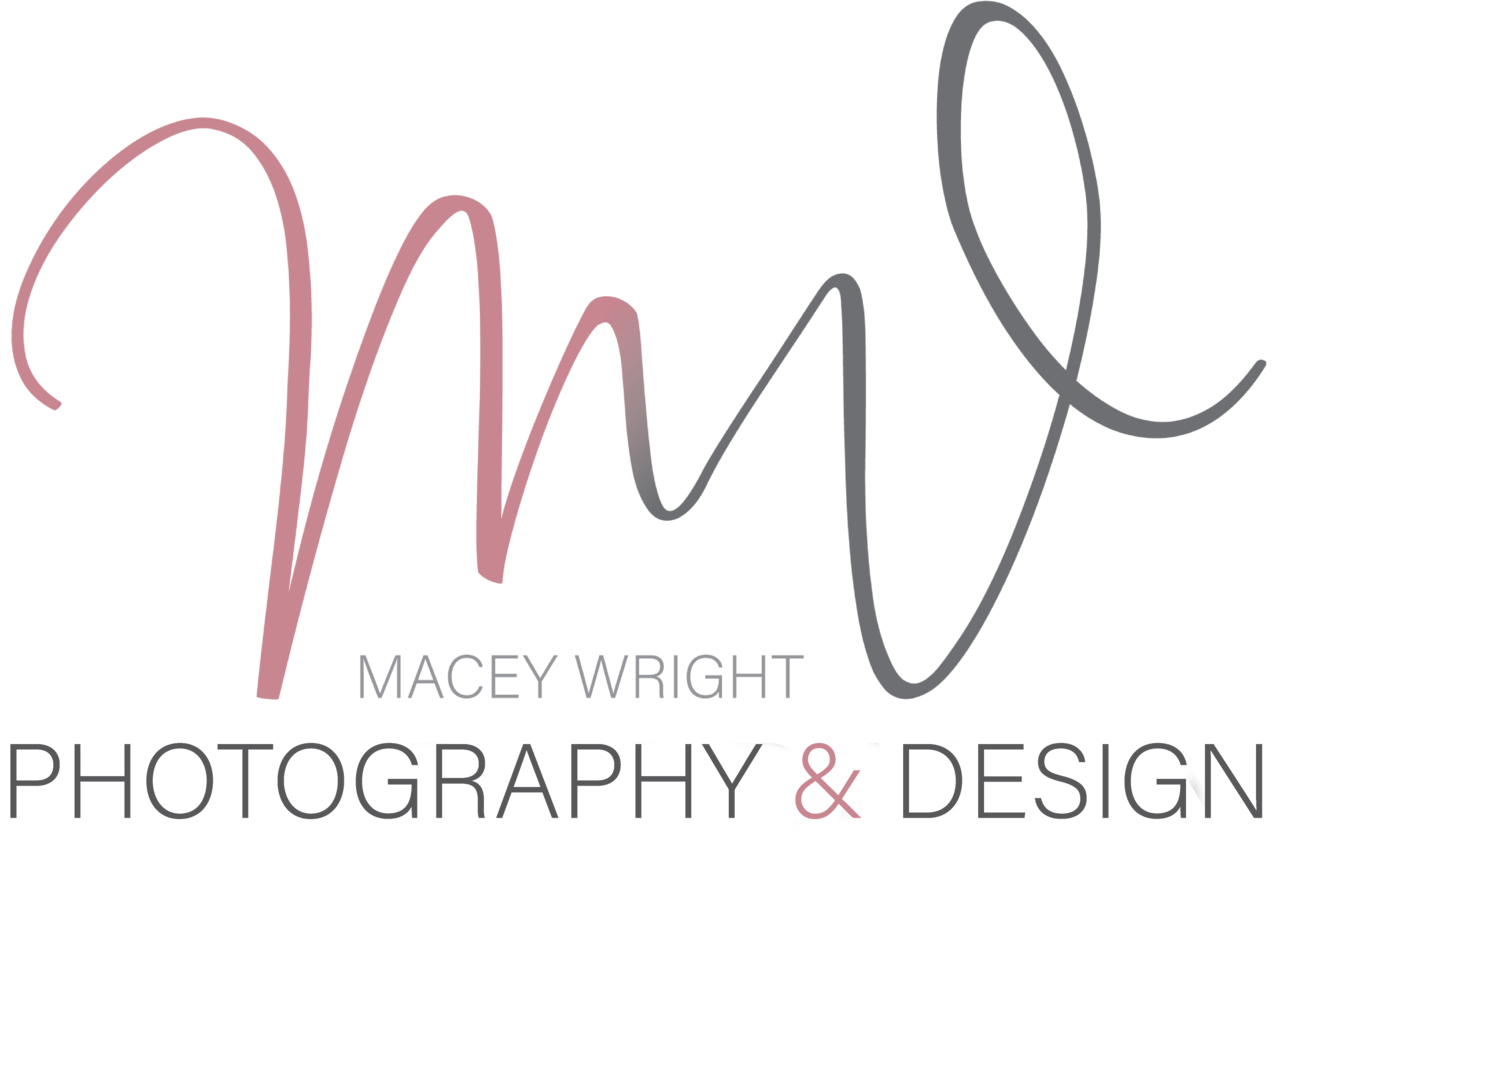 Macey Wright Photography